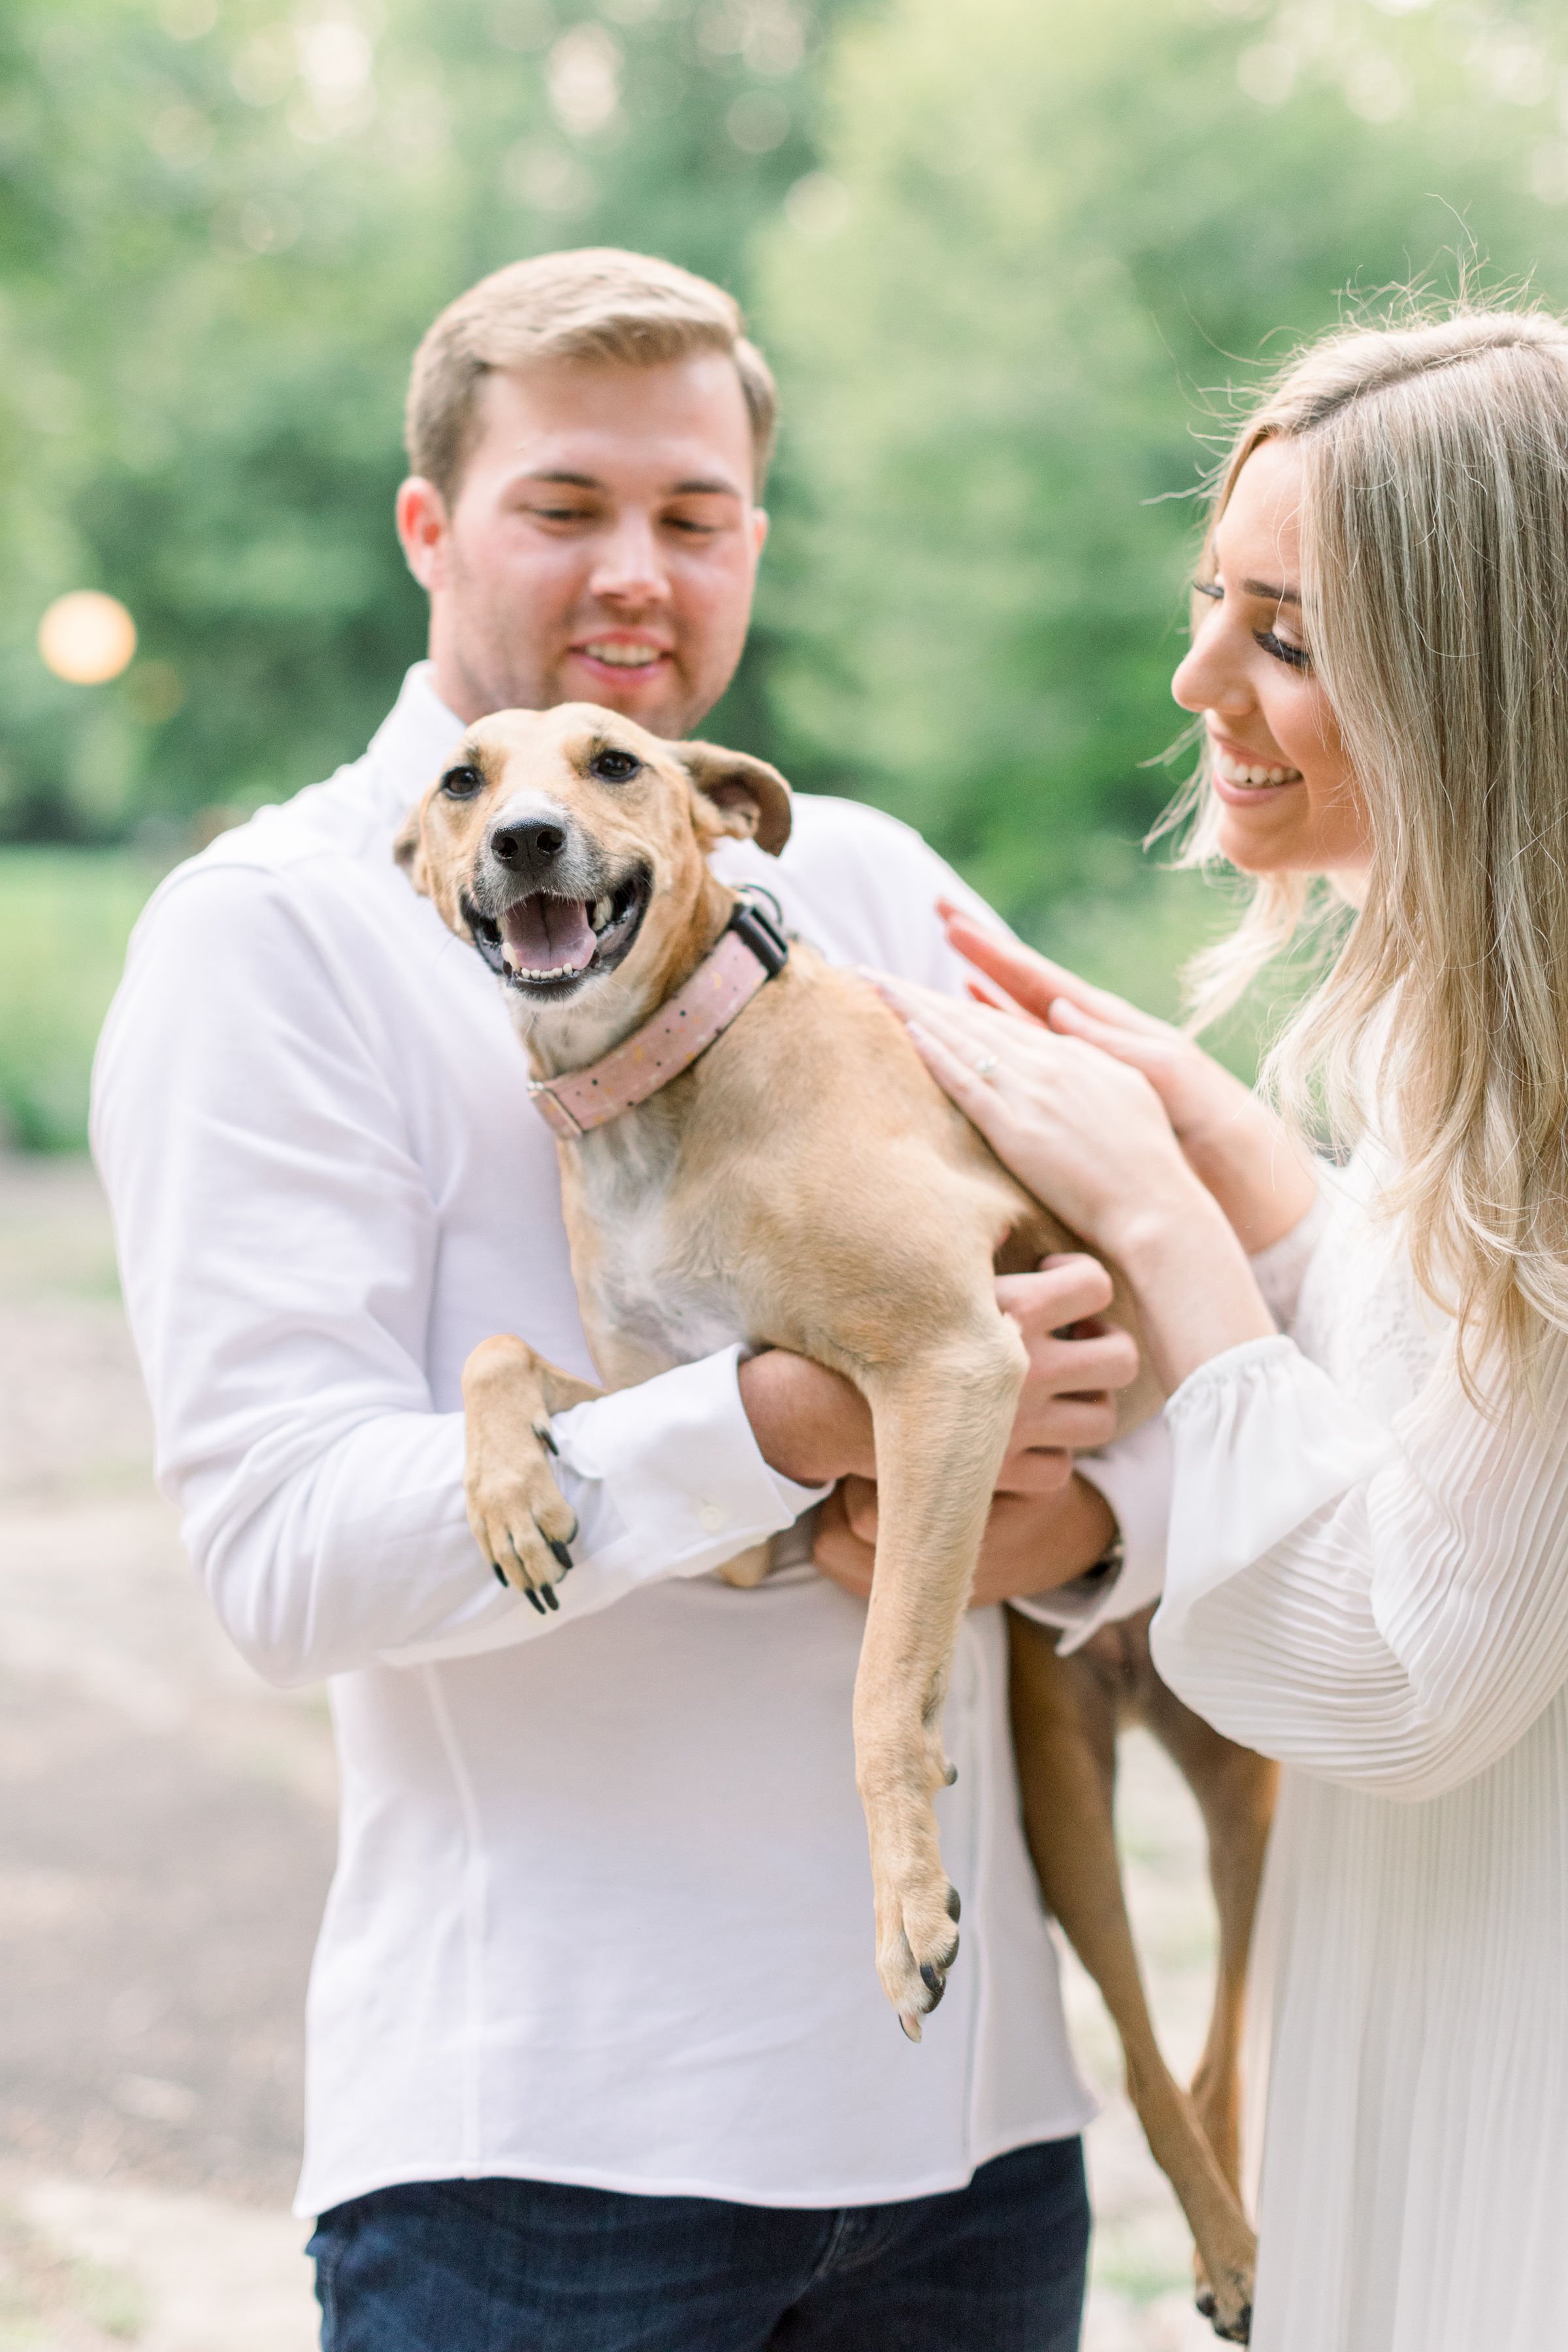  A dog smiles while being held by a man and woman at a park by Chelsea Mason Photography. smiling dog with man and woman Ottawa #Ottawaengagements #Ottawaweddingphotographers #engagementwithdogs #ChelseaMasonPhotography #ChelseaMasonEngagements  